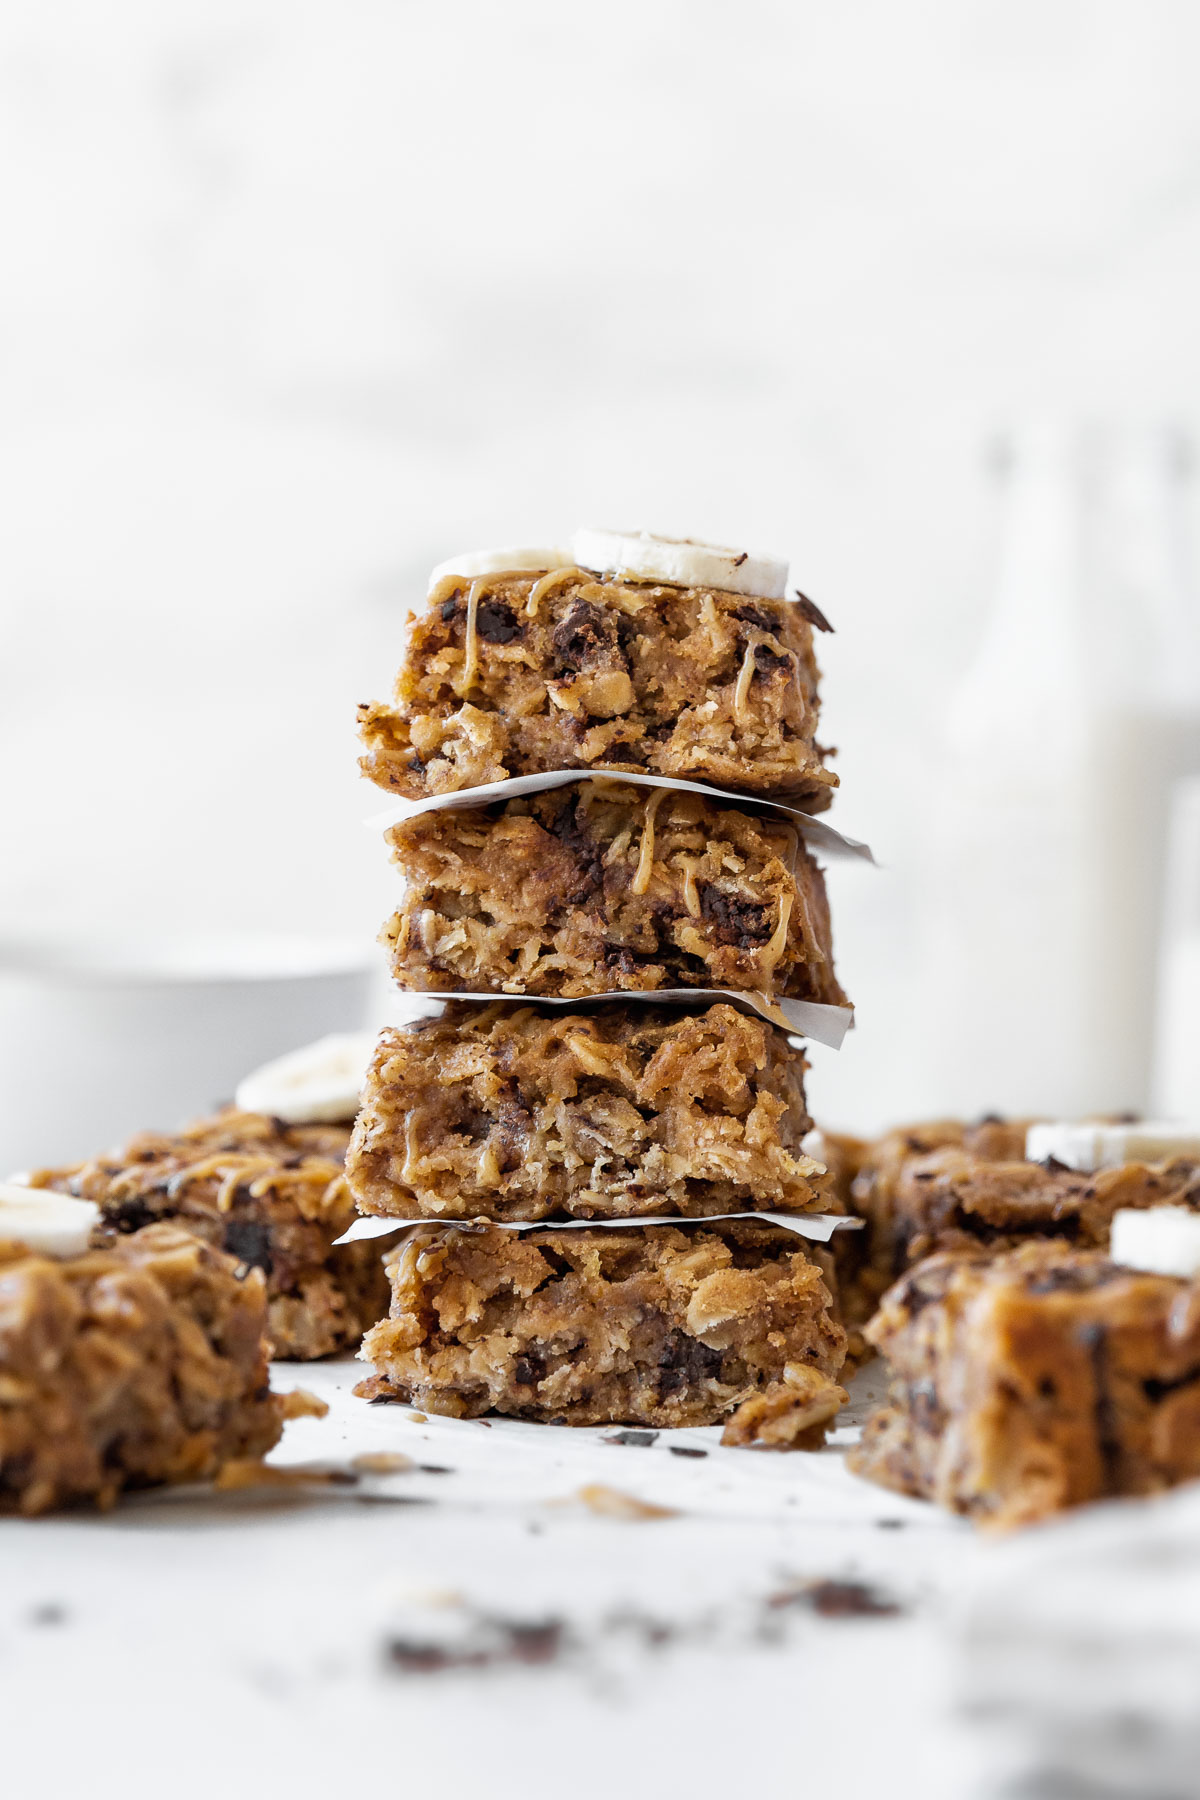 A side shot of a stack of peanut butter oatmeal breakfast bars on the counter with other bars in the background.